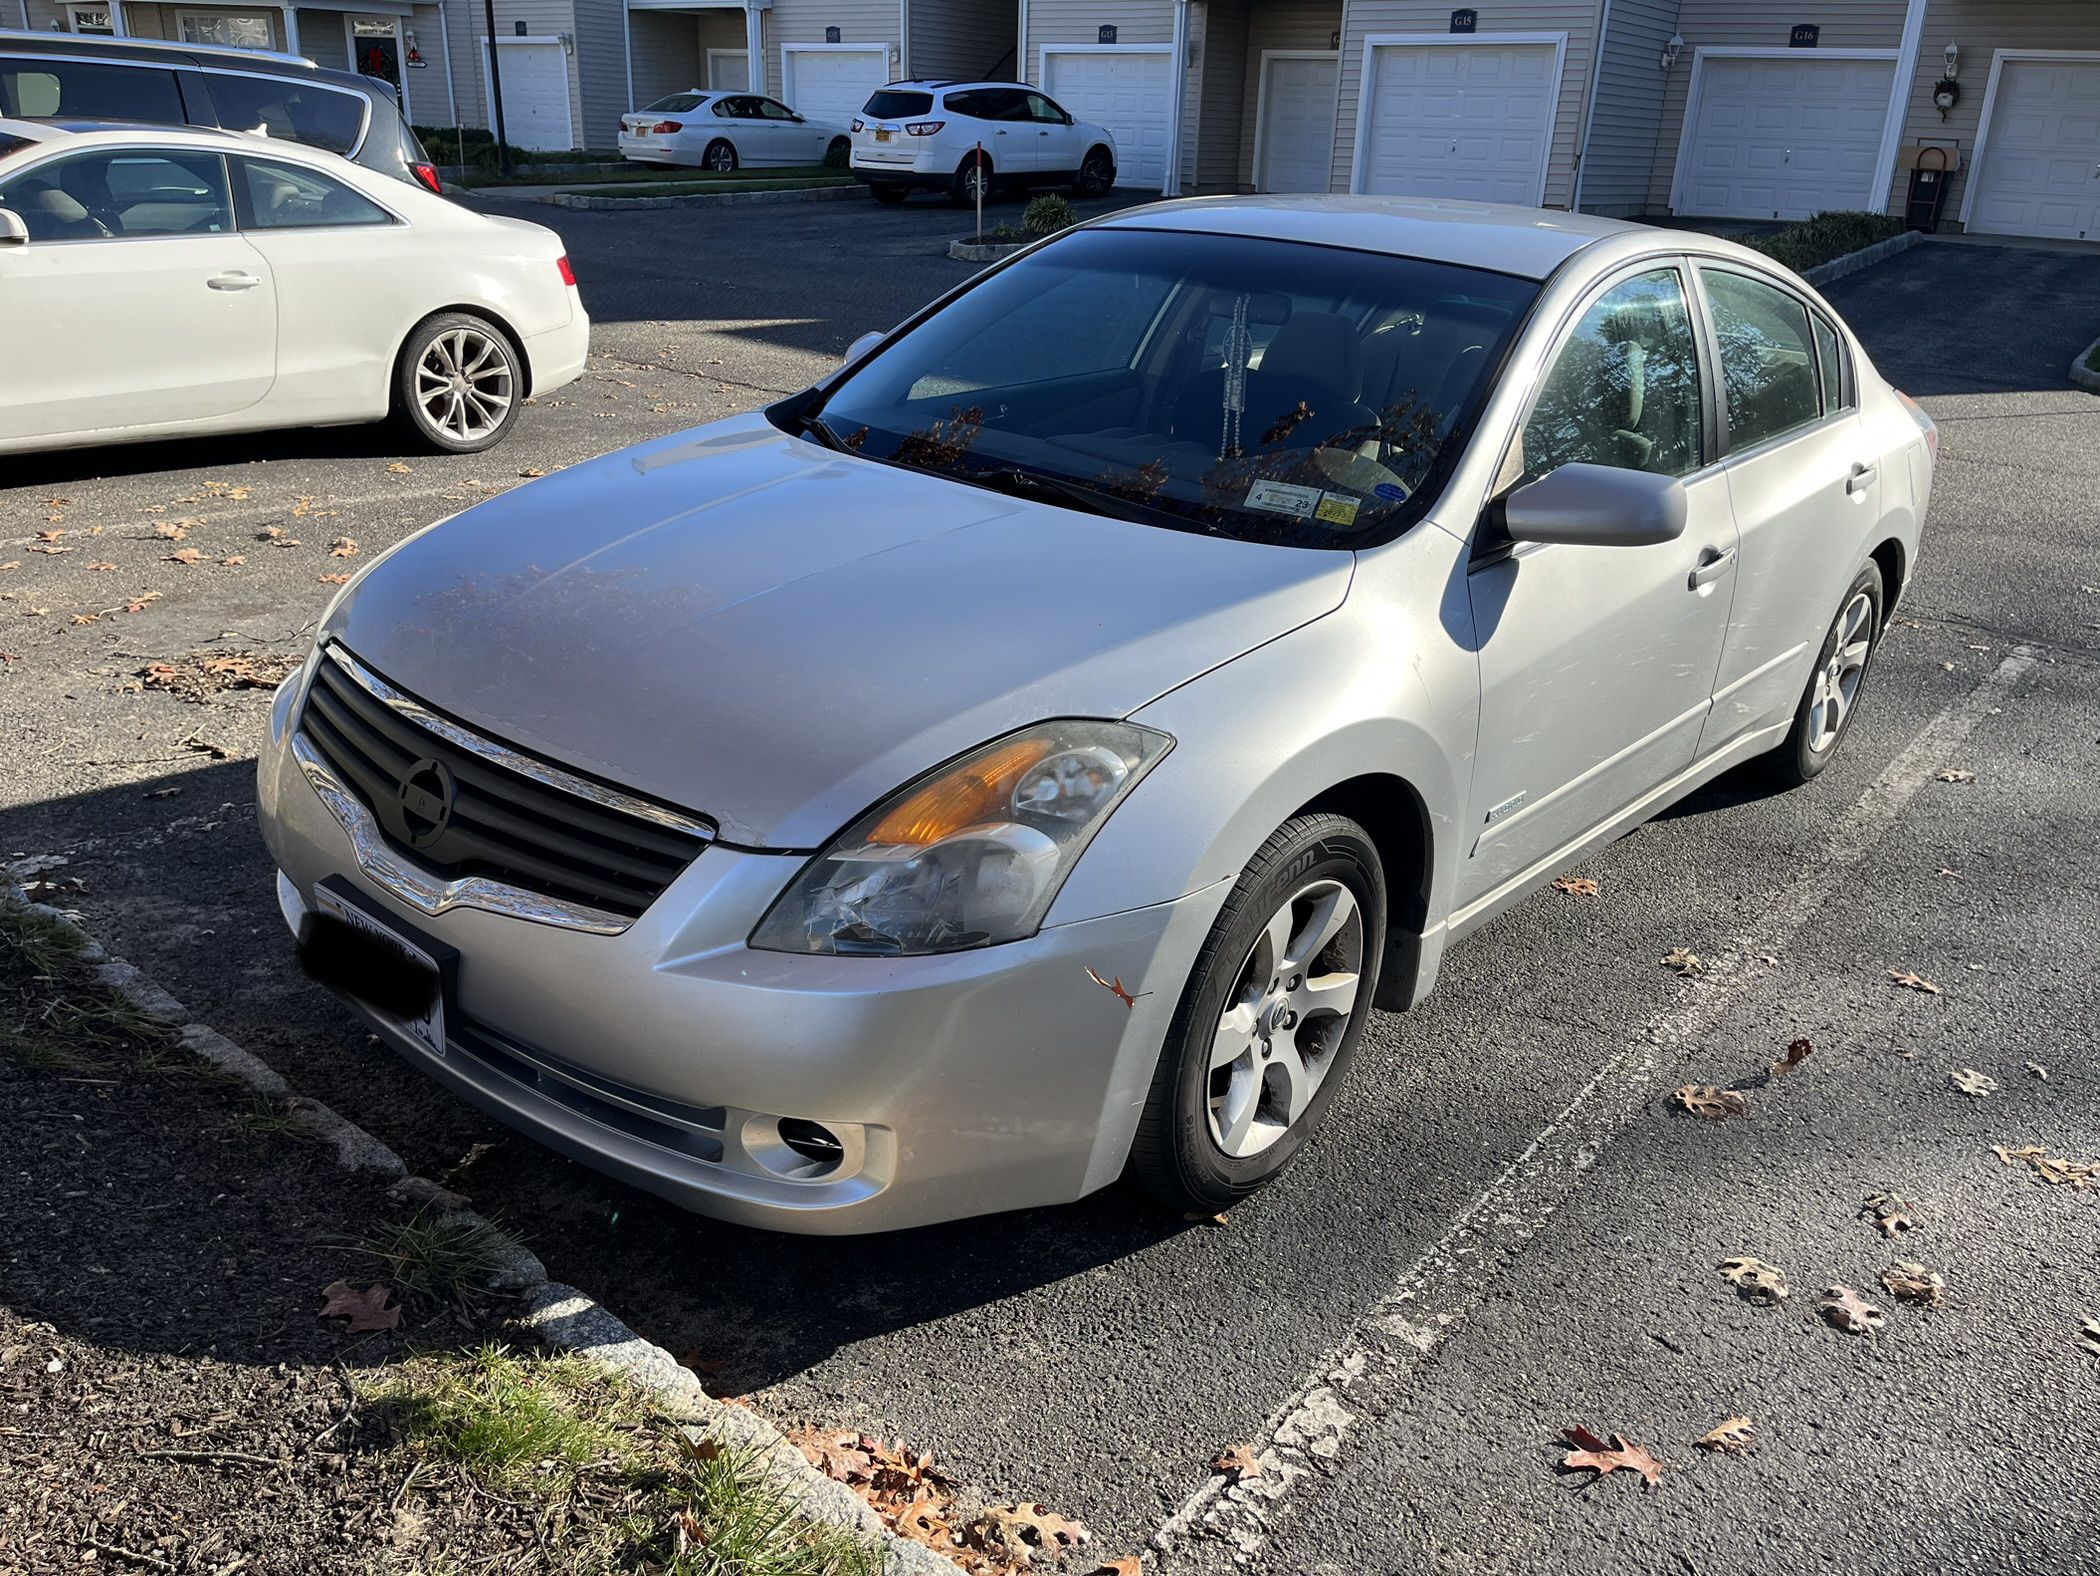 2007 Nissan Altima Hybrid for Sale in Ronkonkoma, NY - OfferUp